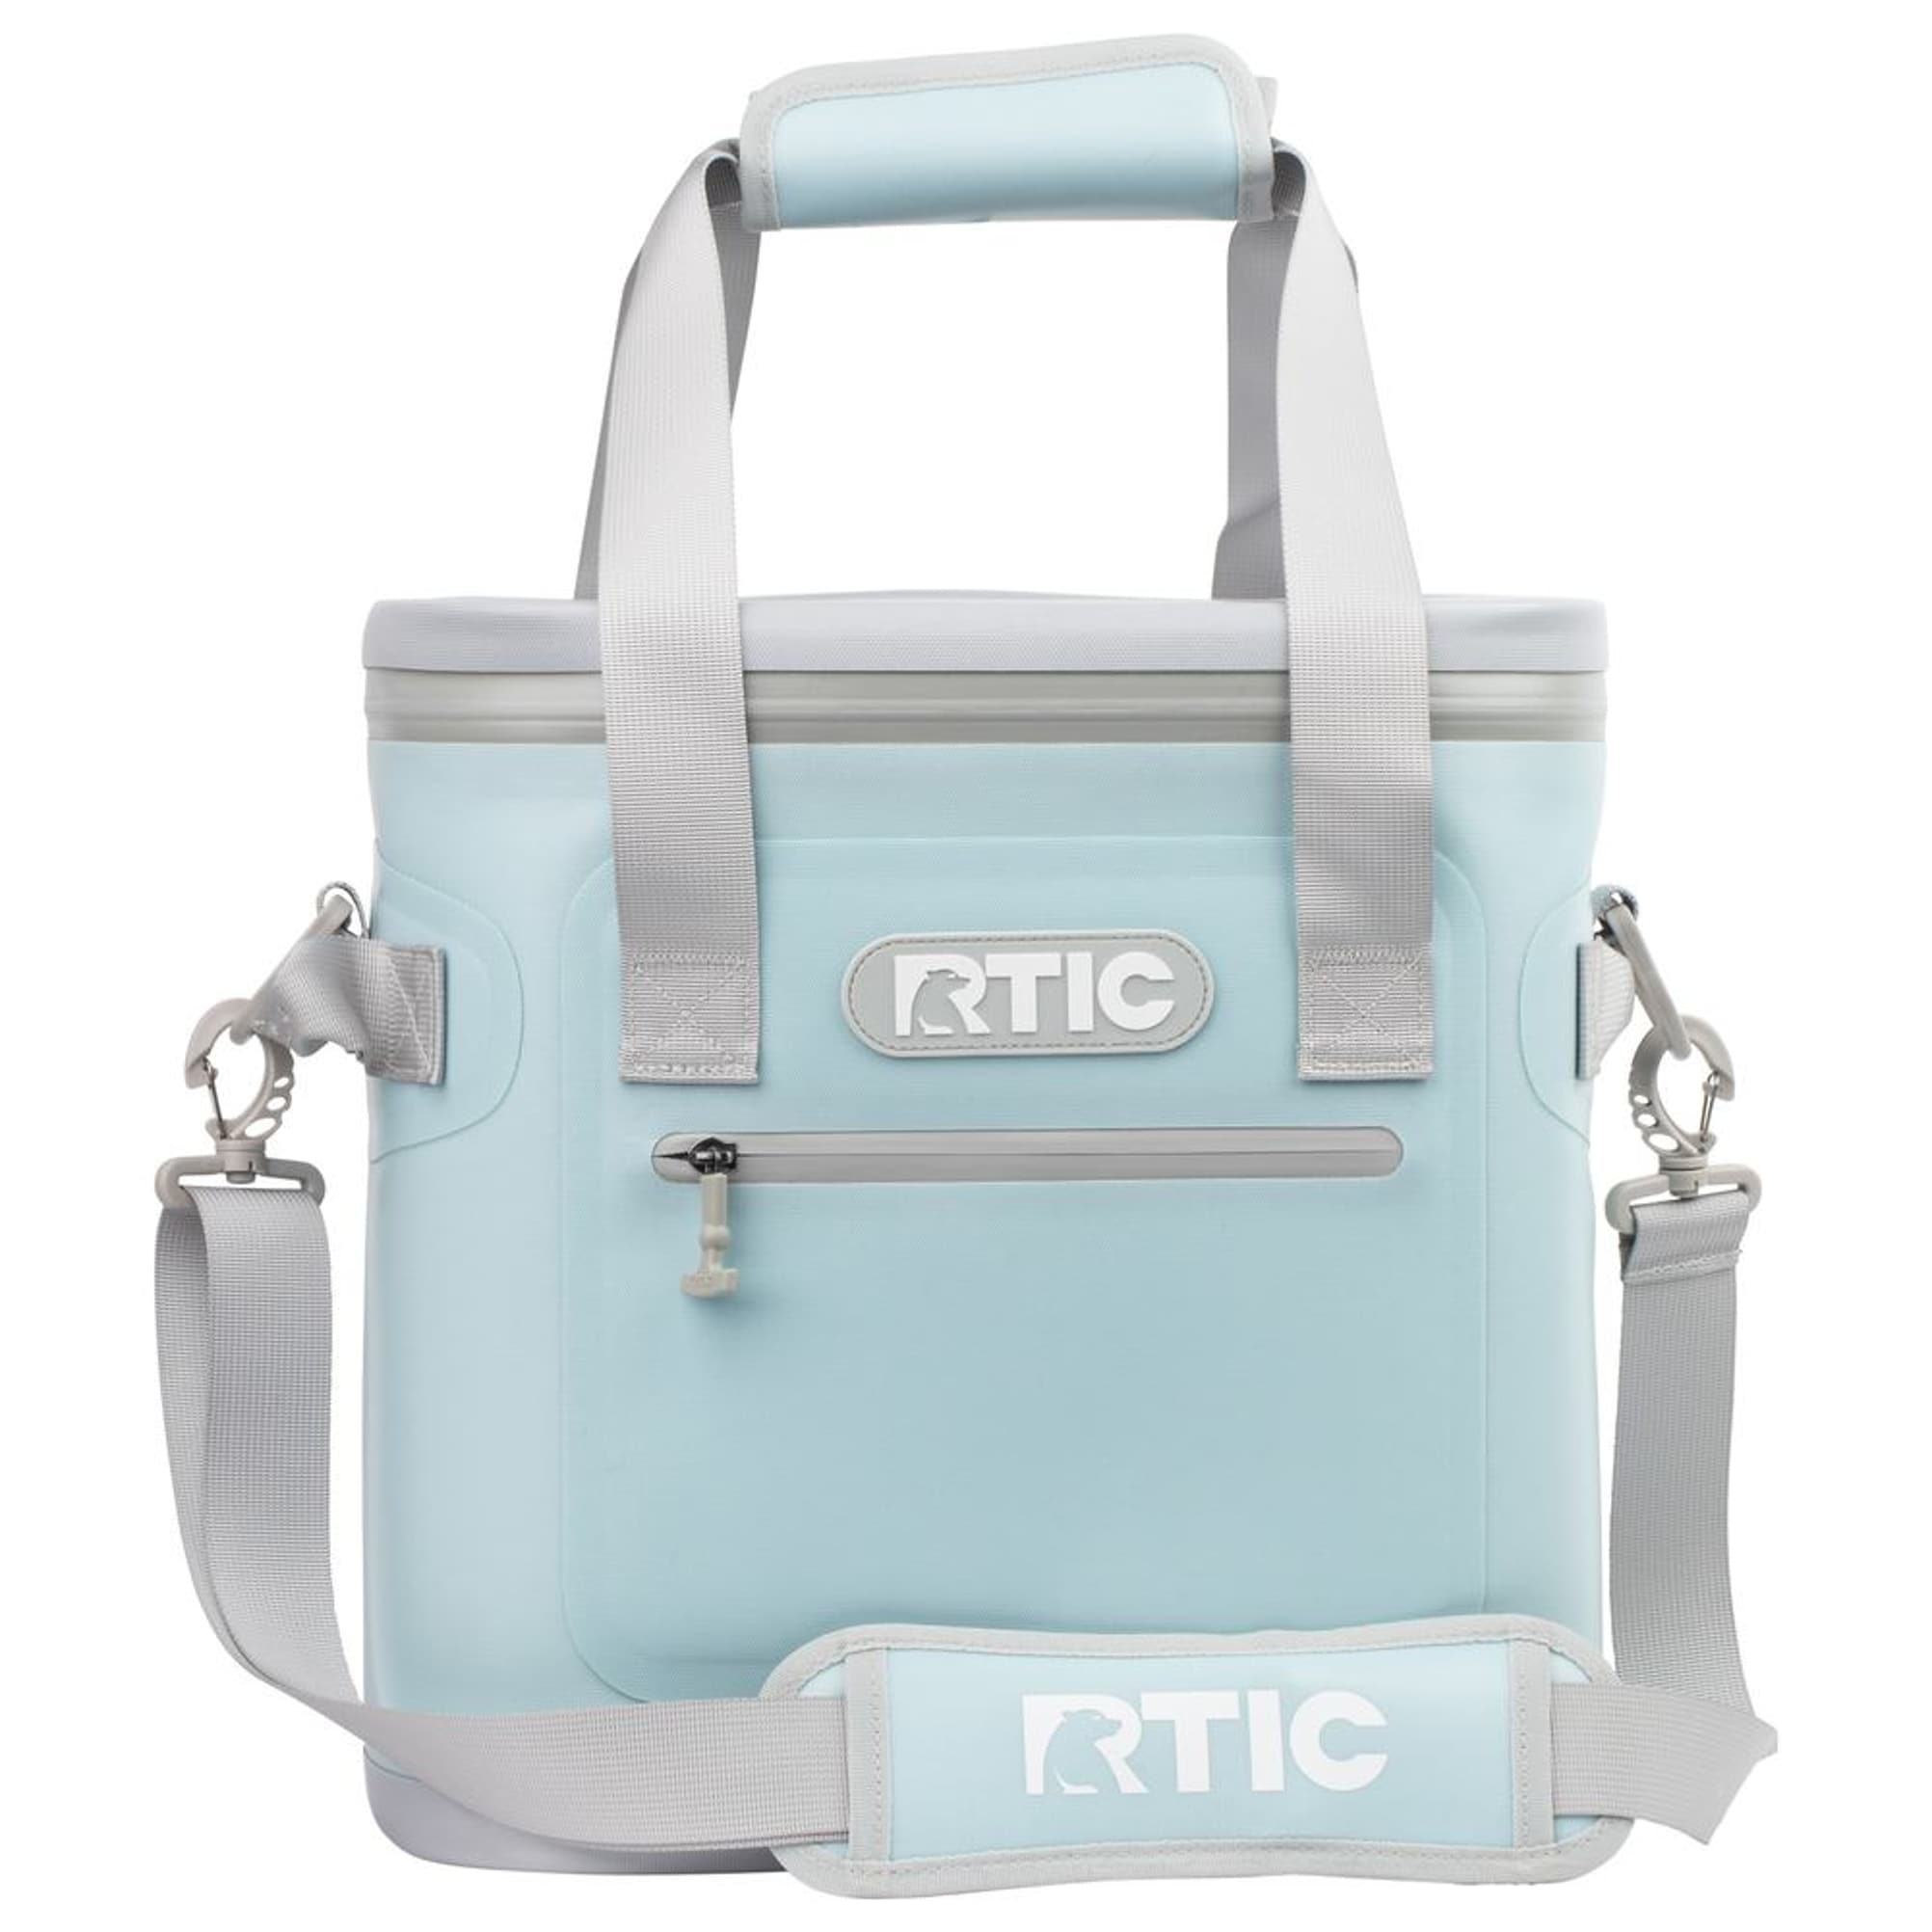 RTIC Soft Cooler 12 Can, Insulated Bag Portable Ice Chest Box for